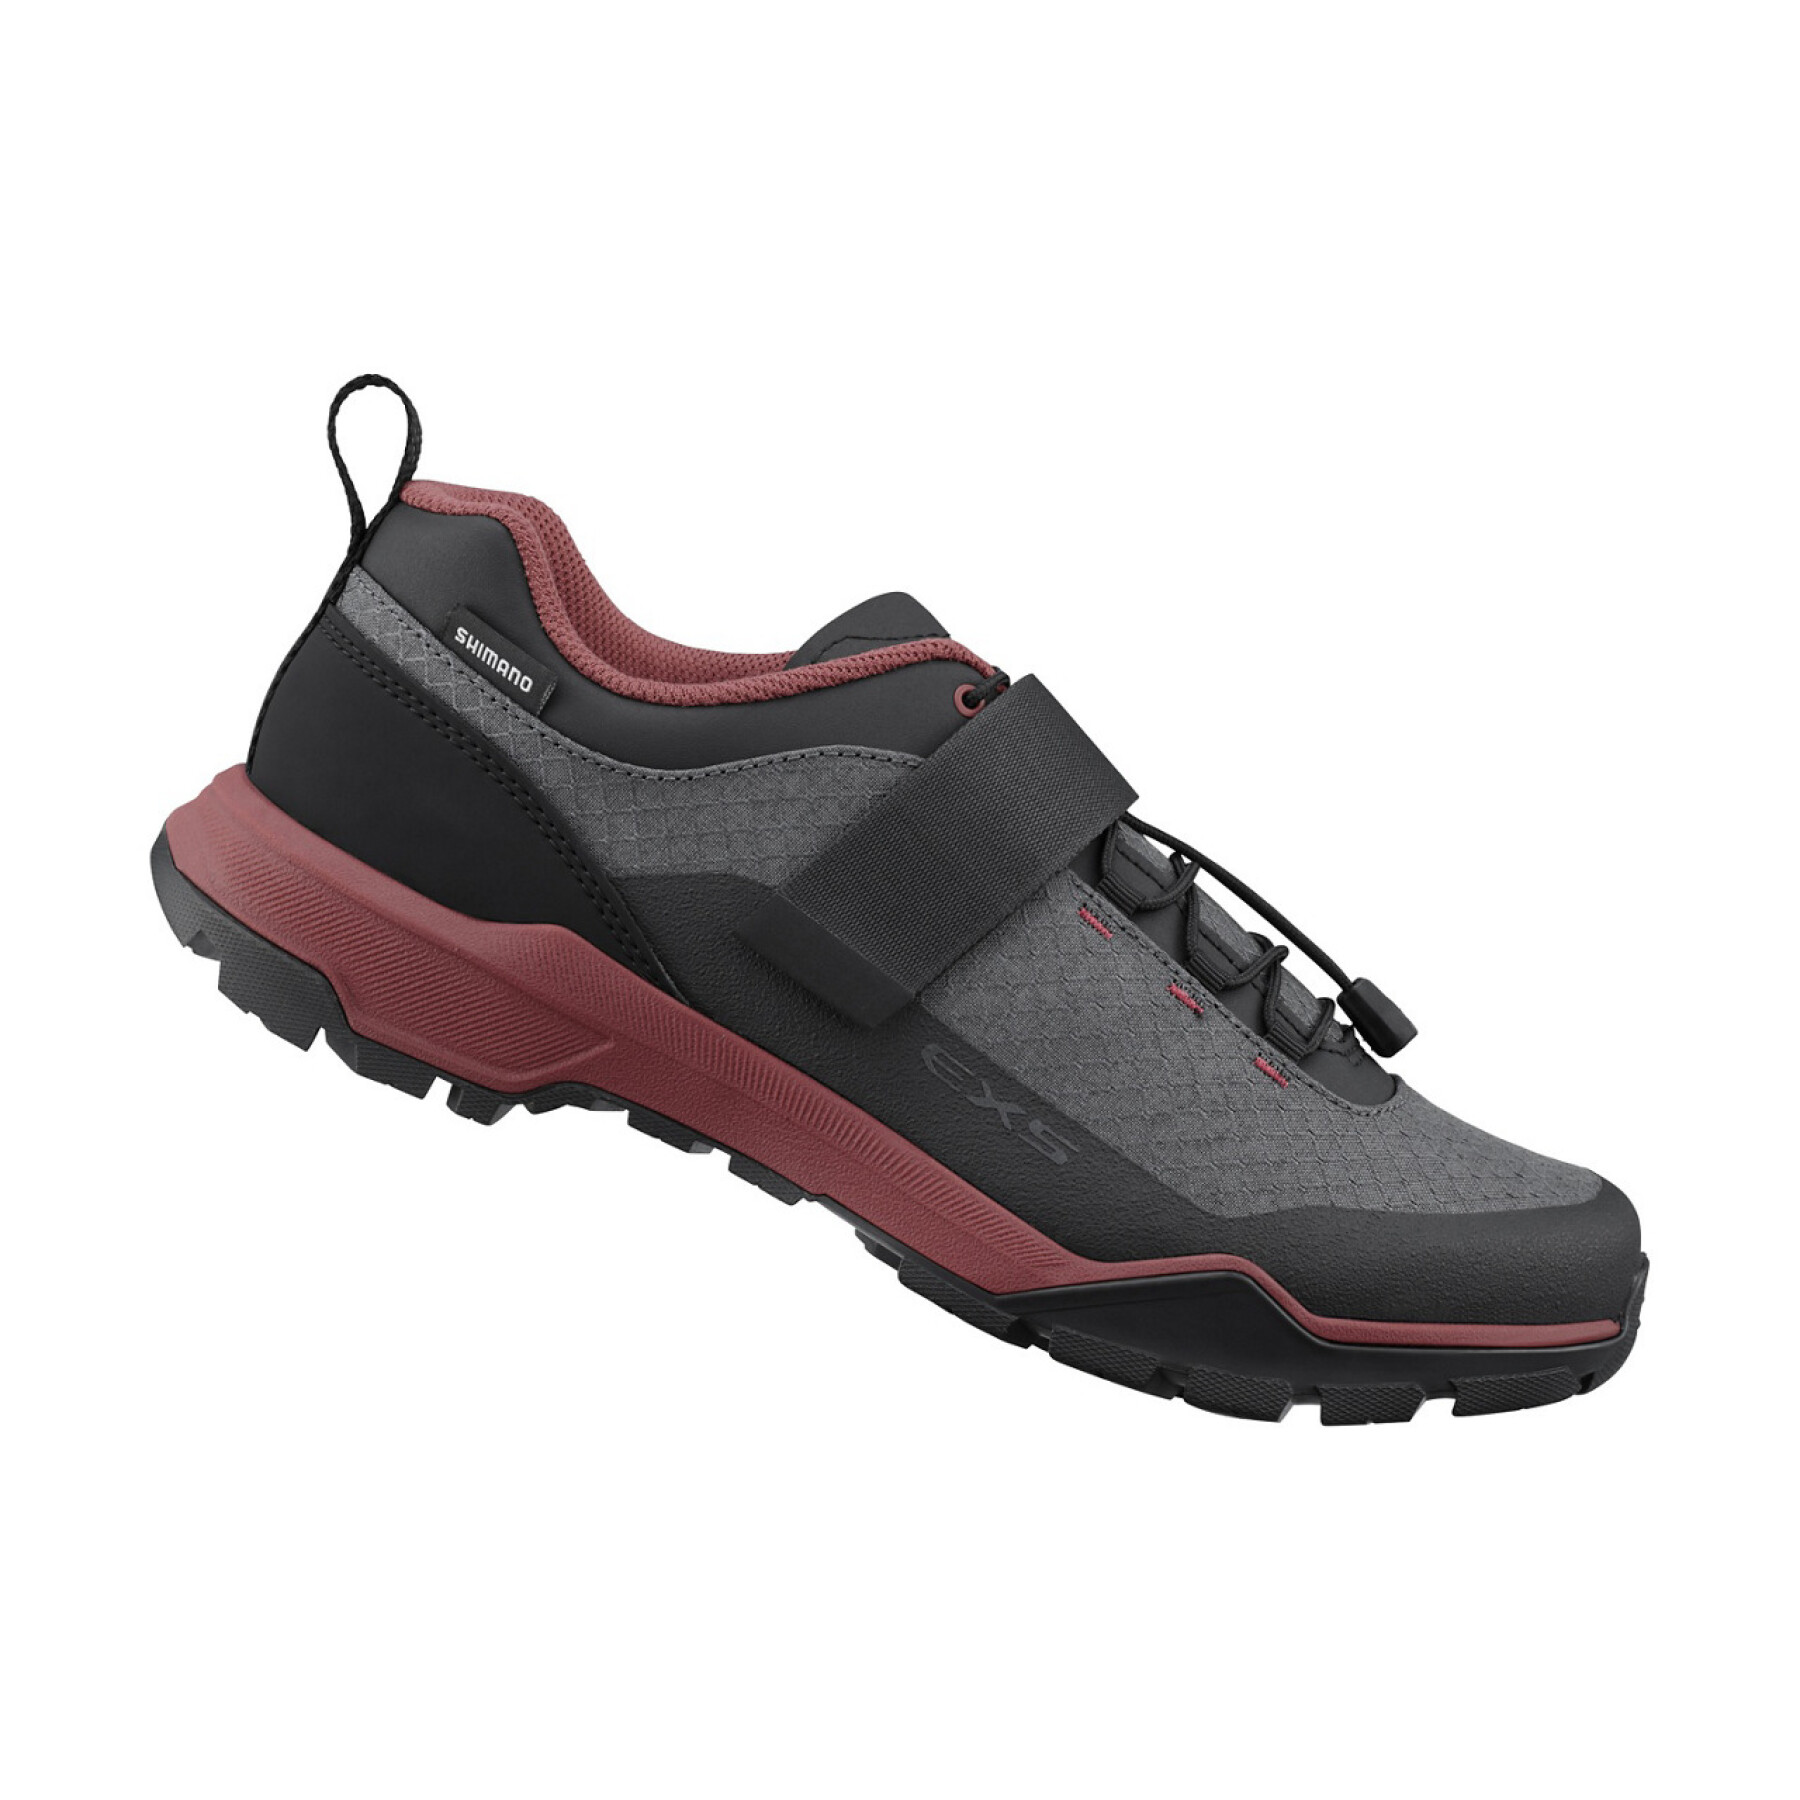 Chaussures femme Shimano SH-EX500